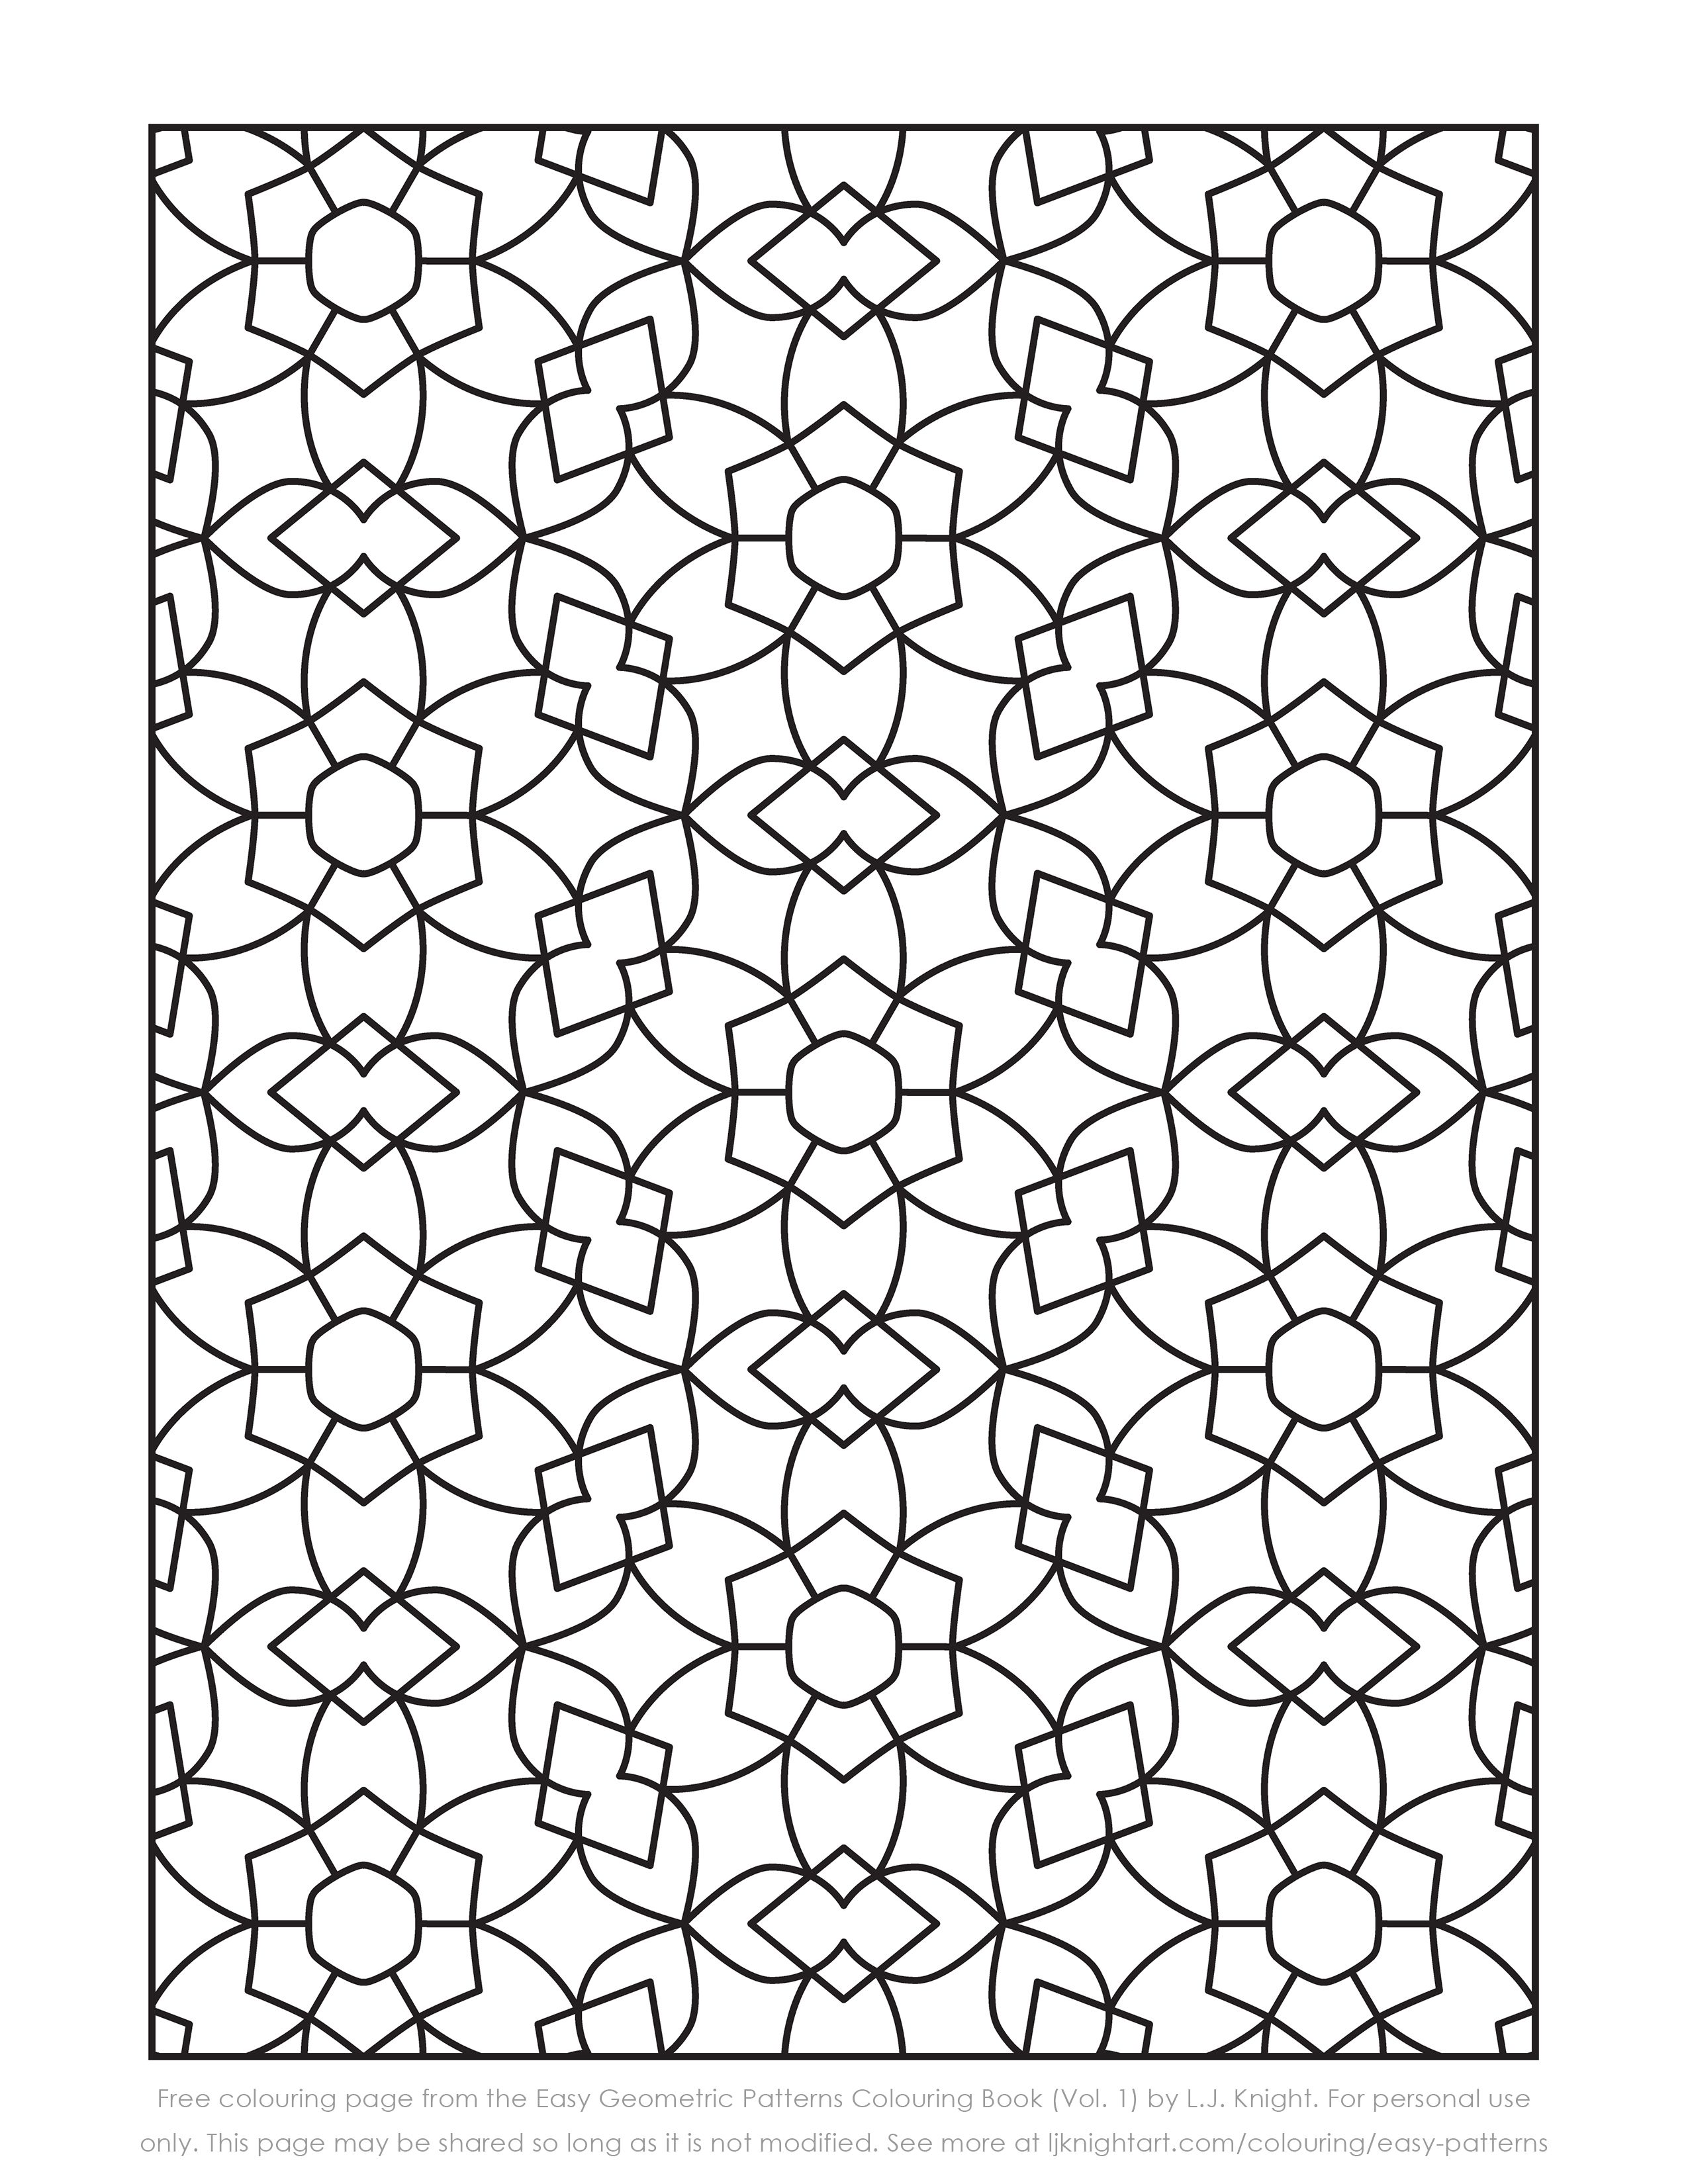 Free easy pattern colouring page geometric coloring pages pattern coloring pages coloring pages